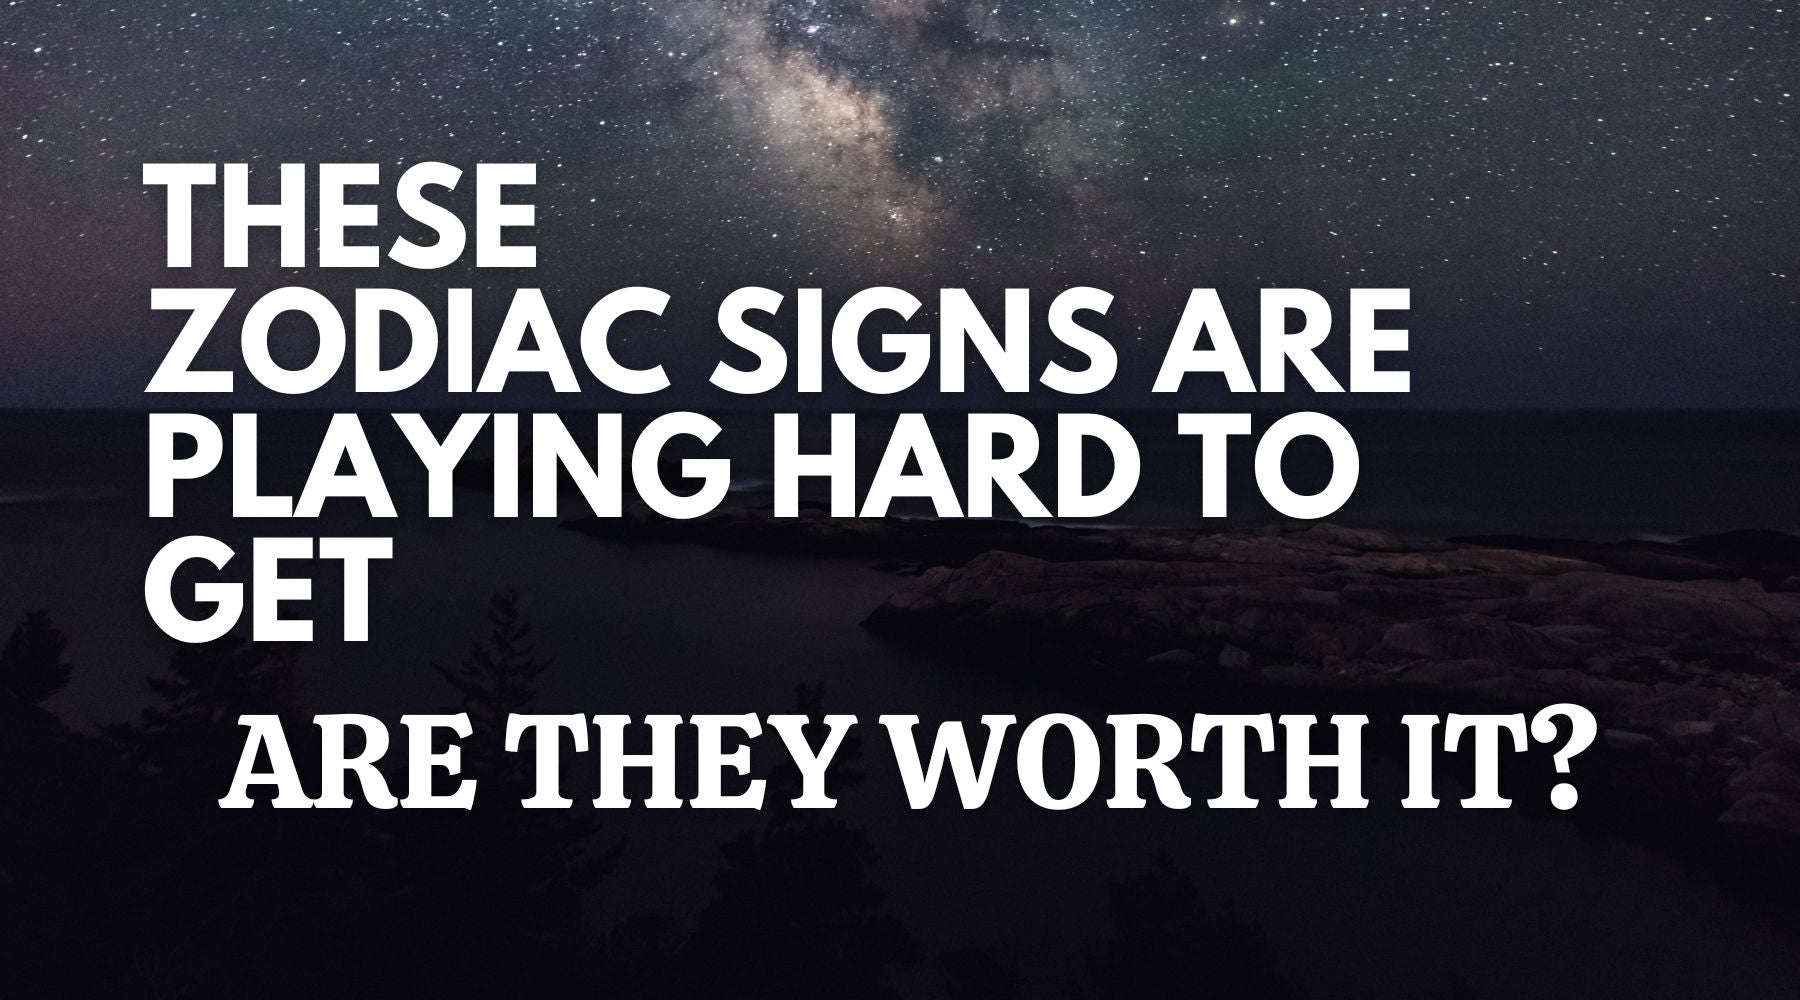 These zodiac signs are playing hard to get-Will they to even want to go out on a date with you?